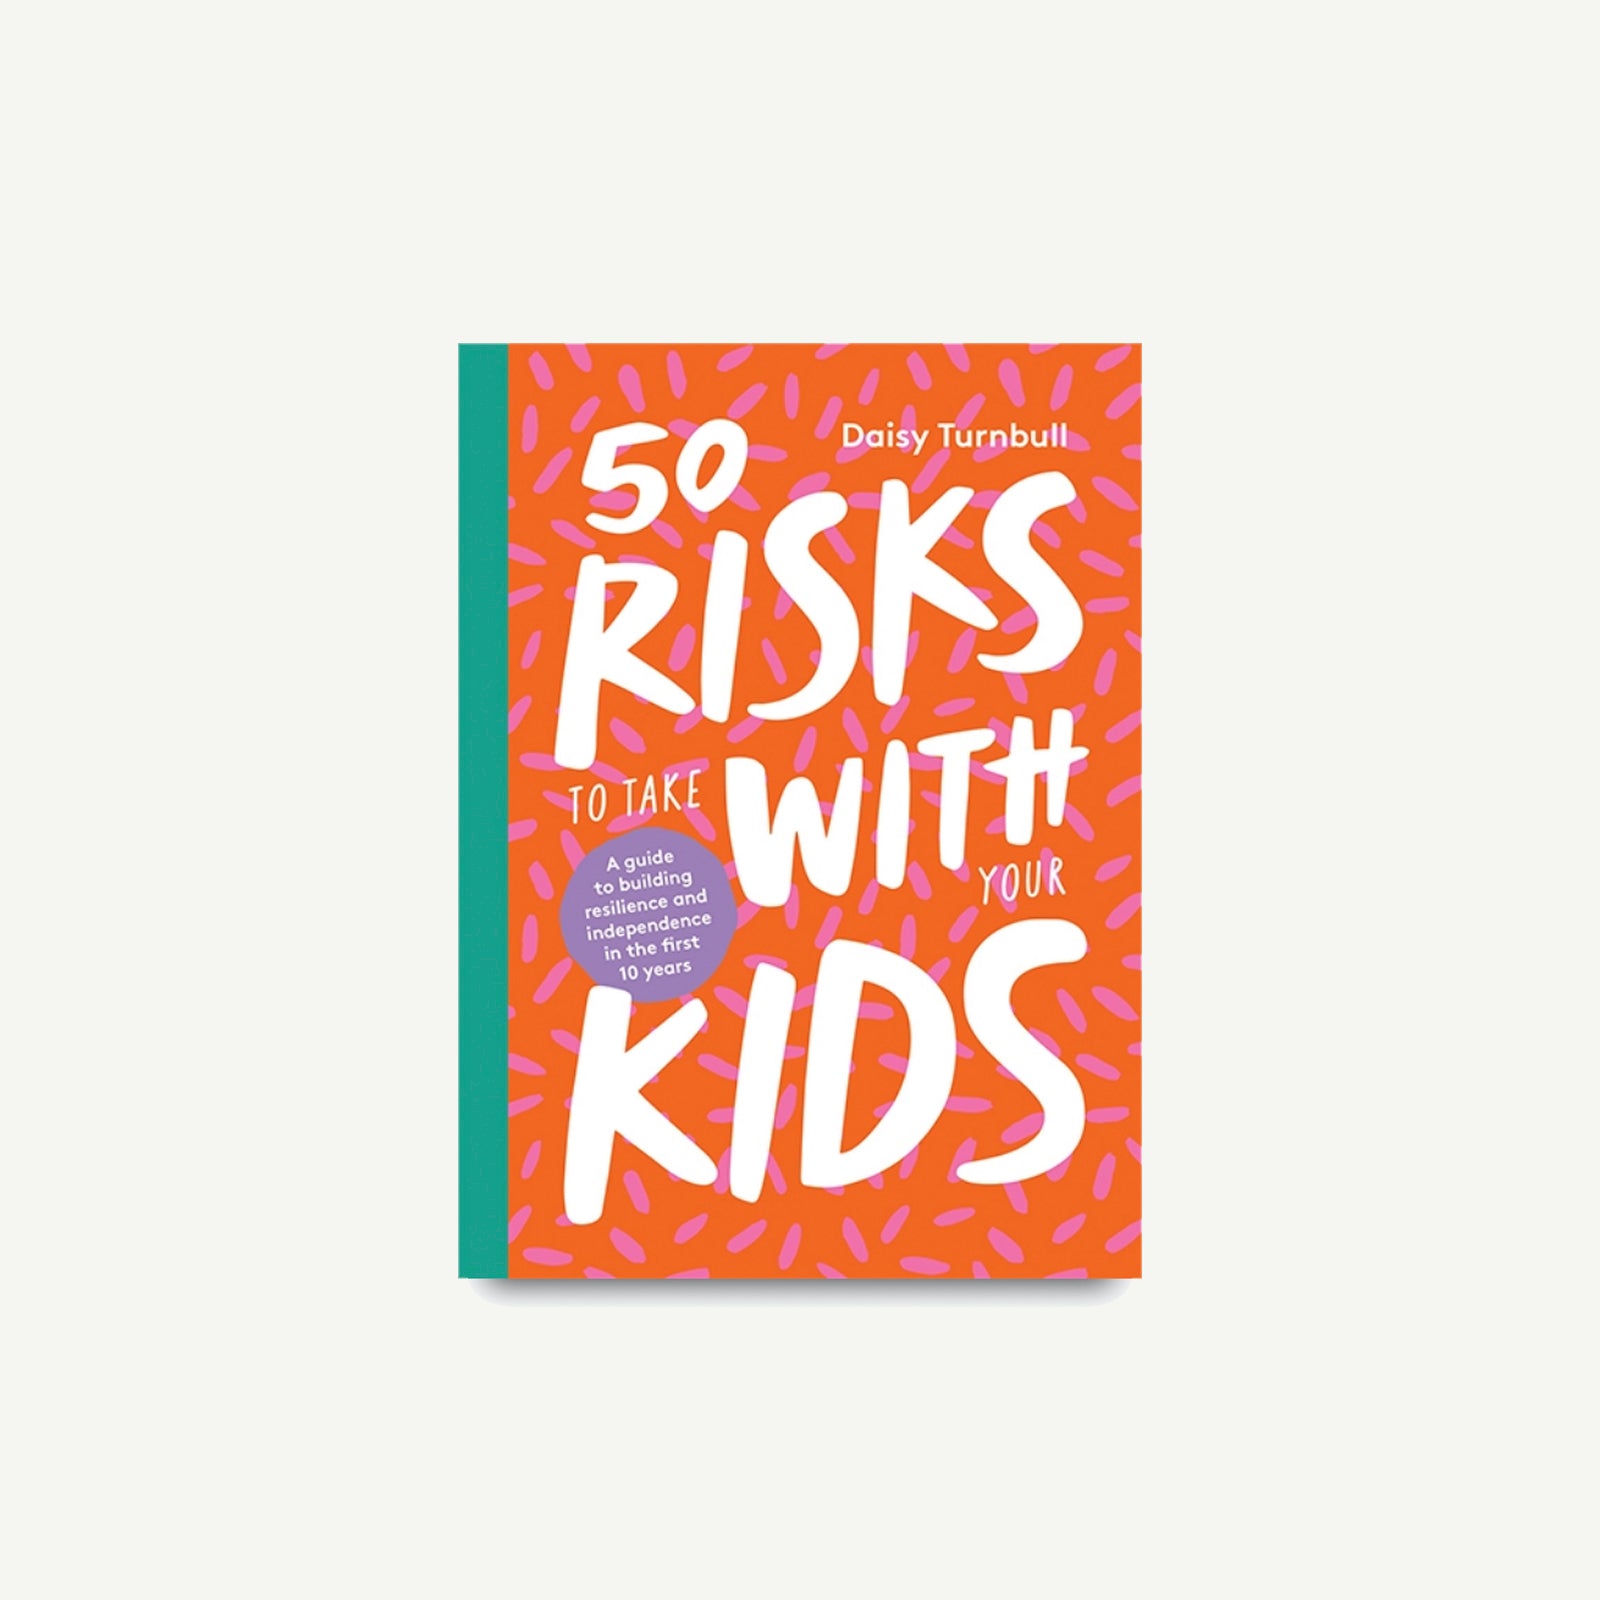 50 Risks to take with your kids - A guide to teaching resilience and independance